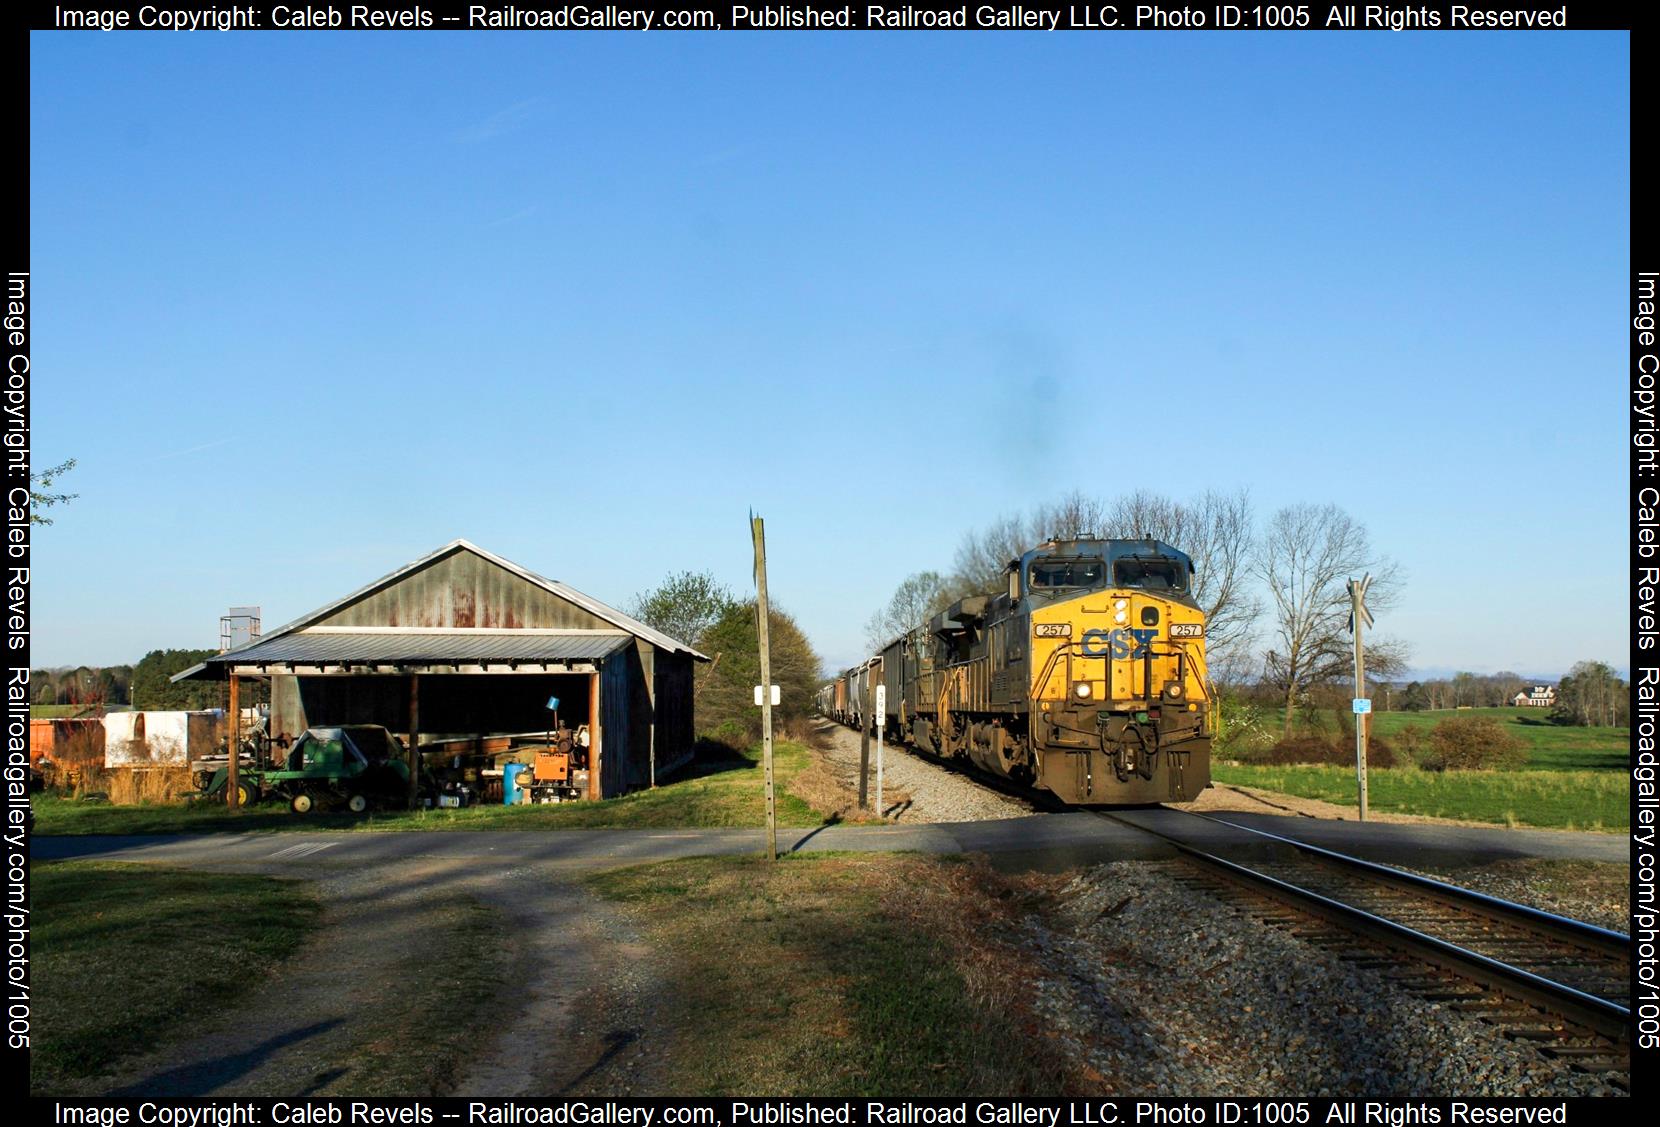 CSXT 257 is a class GE AC4400CW and  is pictured in Lattimore, North Carolina, USA.  This was taken along the CSX Charlotte Subdivision  on the CSX Transportation. Photo Copyright: Caleb Revels uploaded to Railroad Gallery on 04/28/2023. This photograph of CSXT 257 was taken on Saturday, March 11, 2023. All Rights Reserved. 